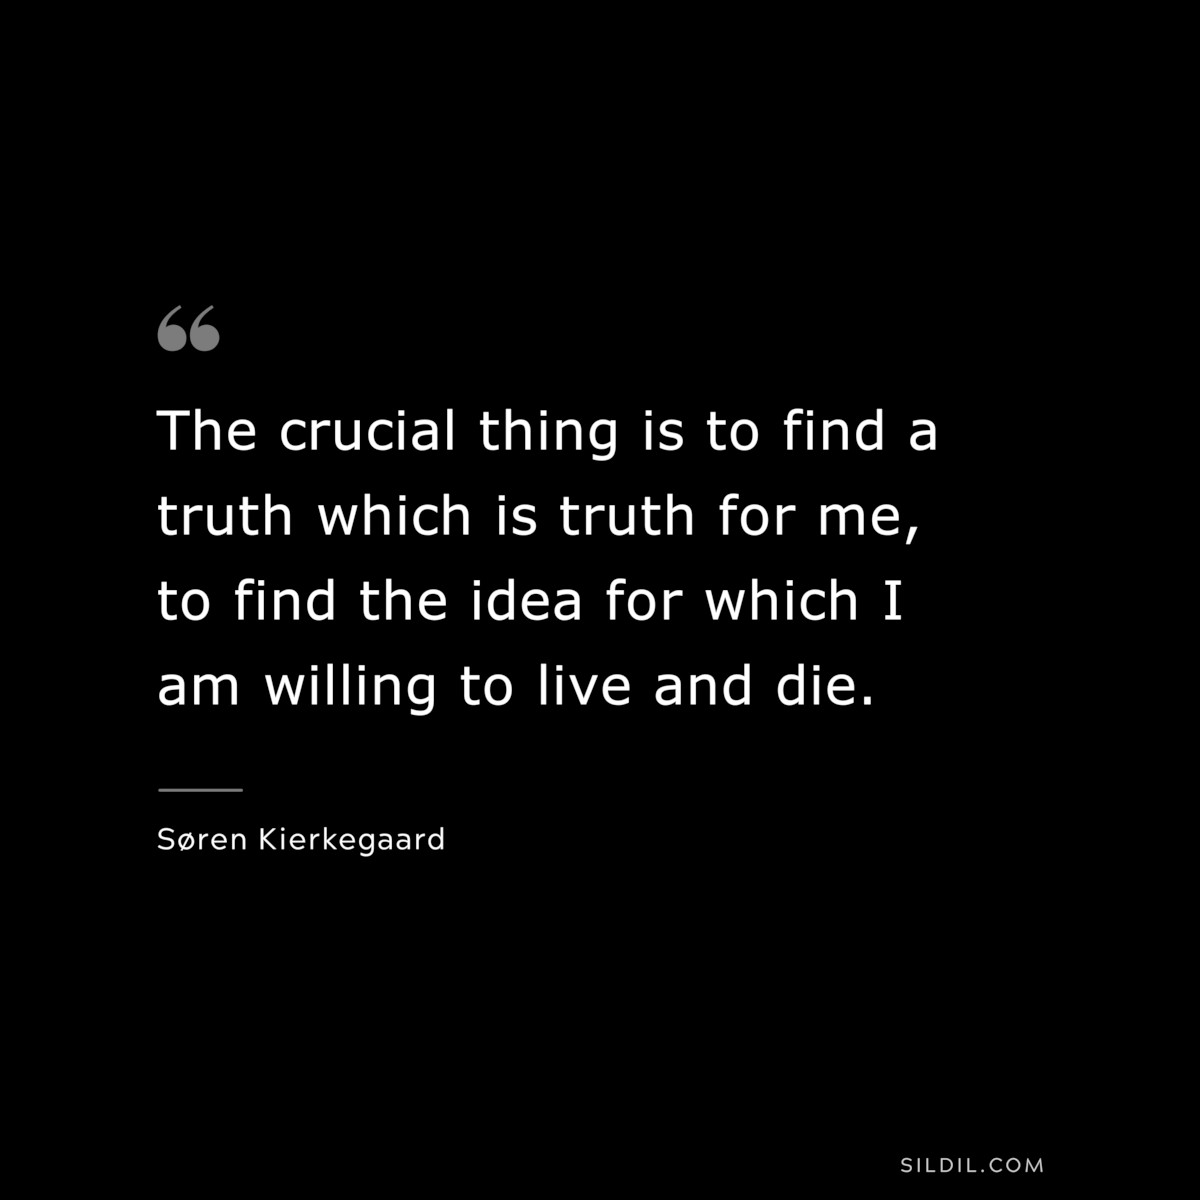 The crucial thing is to find a truth which is truth for me, to find the idea for which I am willing to live and die. ― Søren Kierkegaard